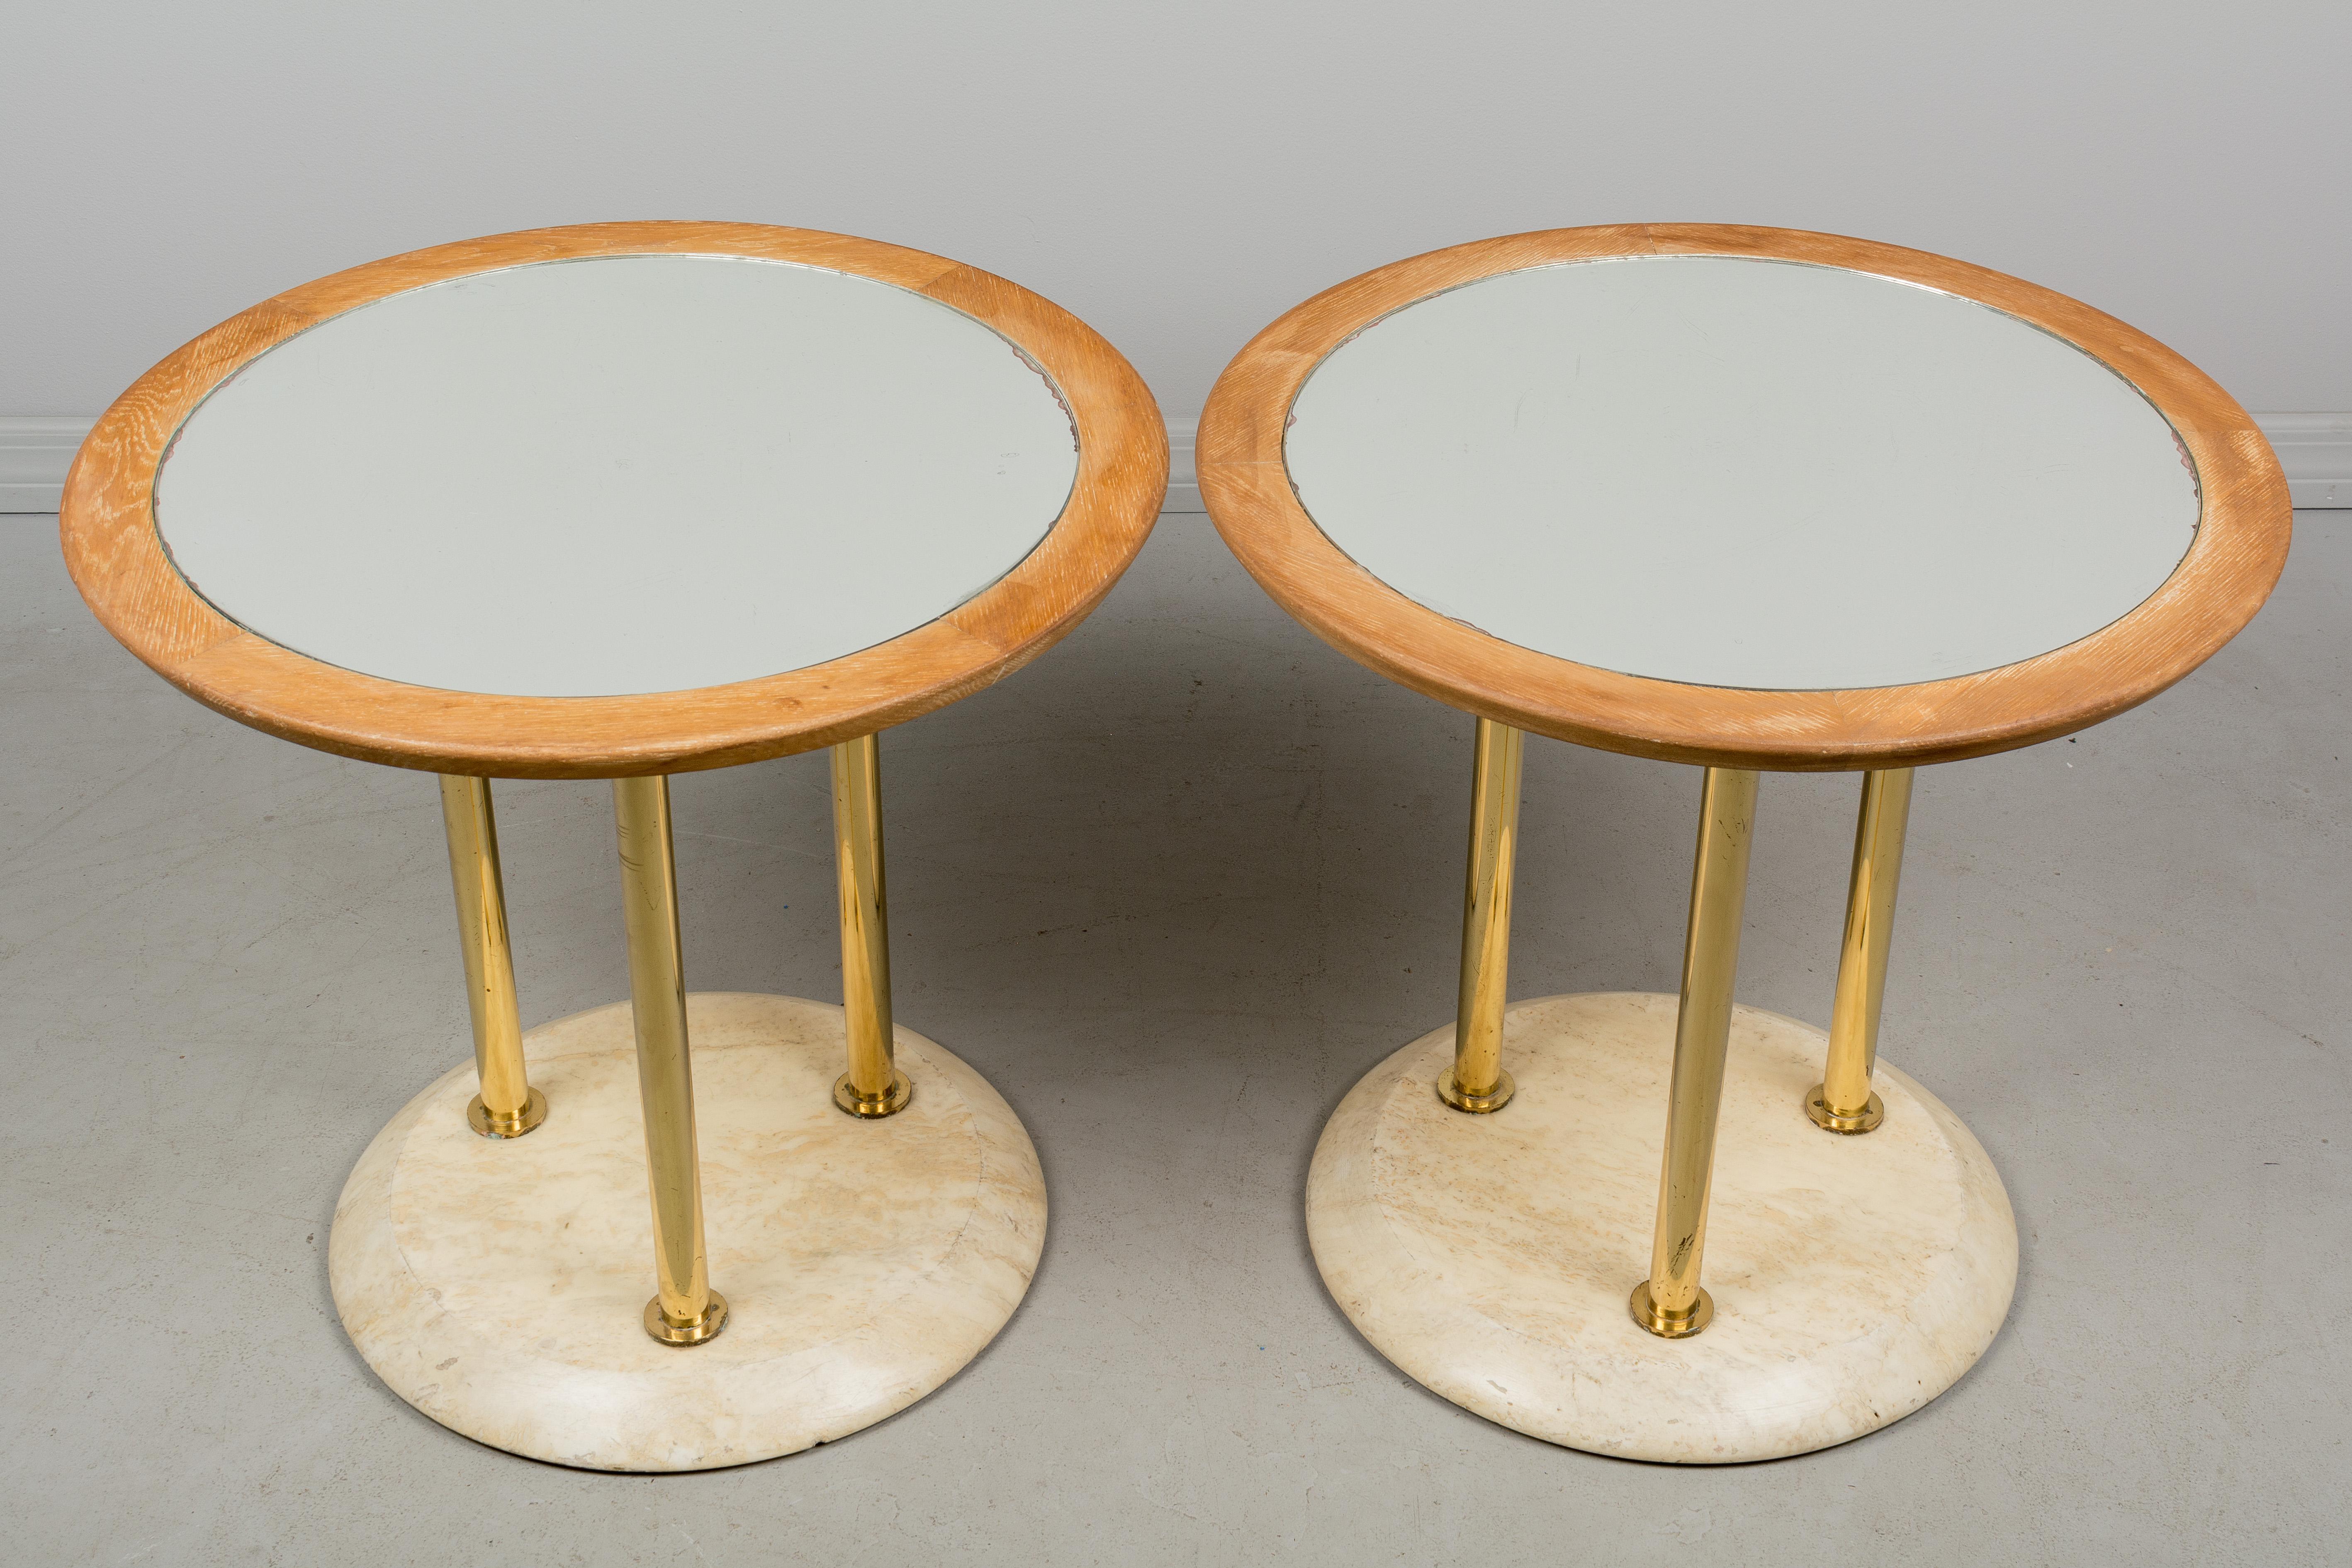 A pair of French Art Deco guéridon cocktail tables with circular wood tops inset with mirror, tubular brass legs and travertine base. Mirrors are scratched especially around the perimeter. Weight: 51 lbs. each.